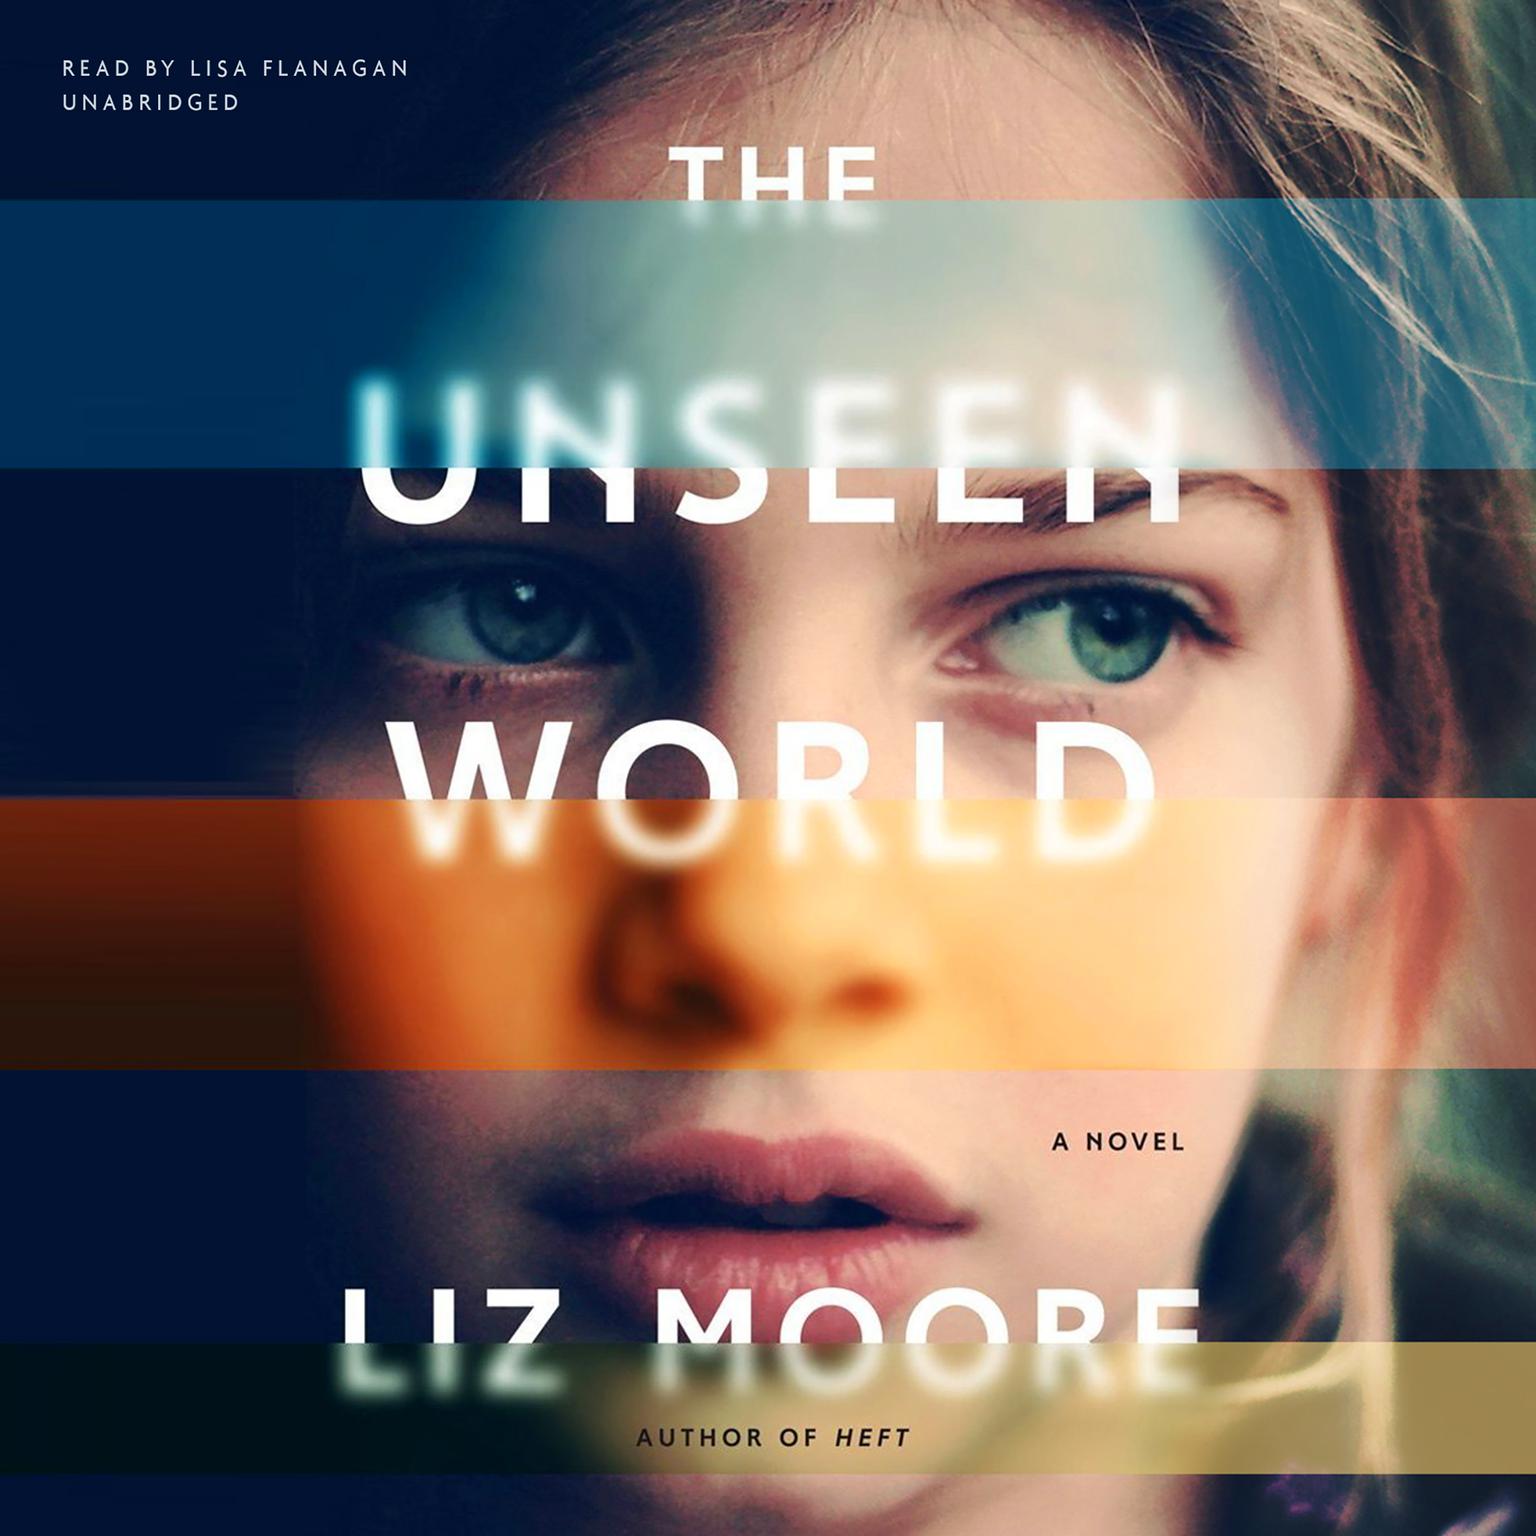 The Unseen World Audiobook, by Liz Moore